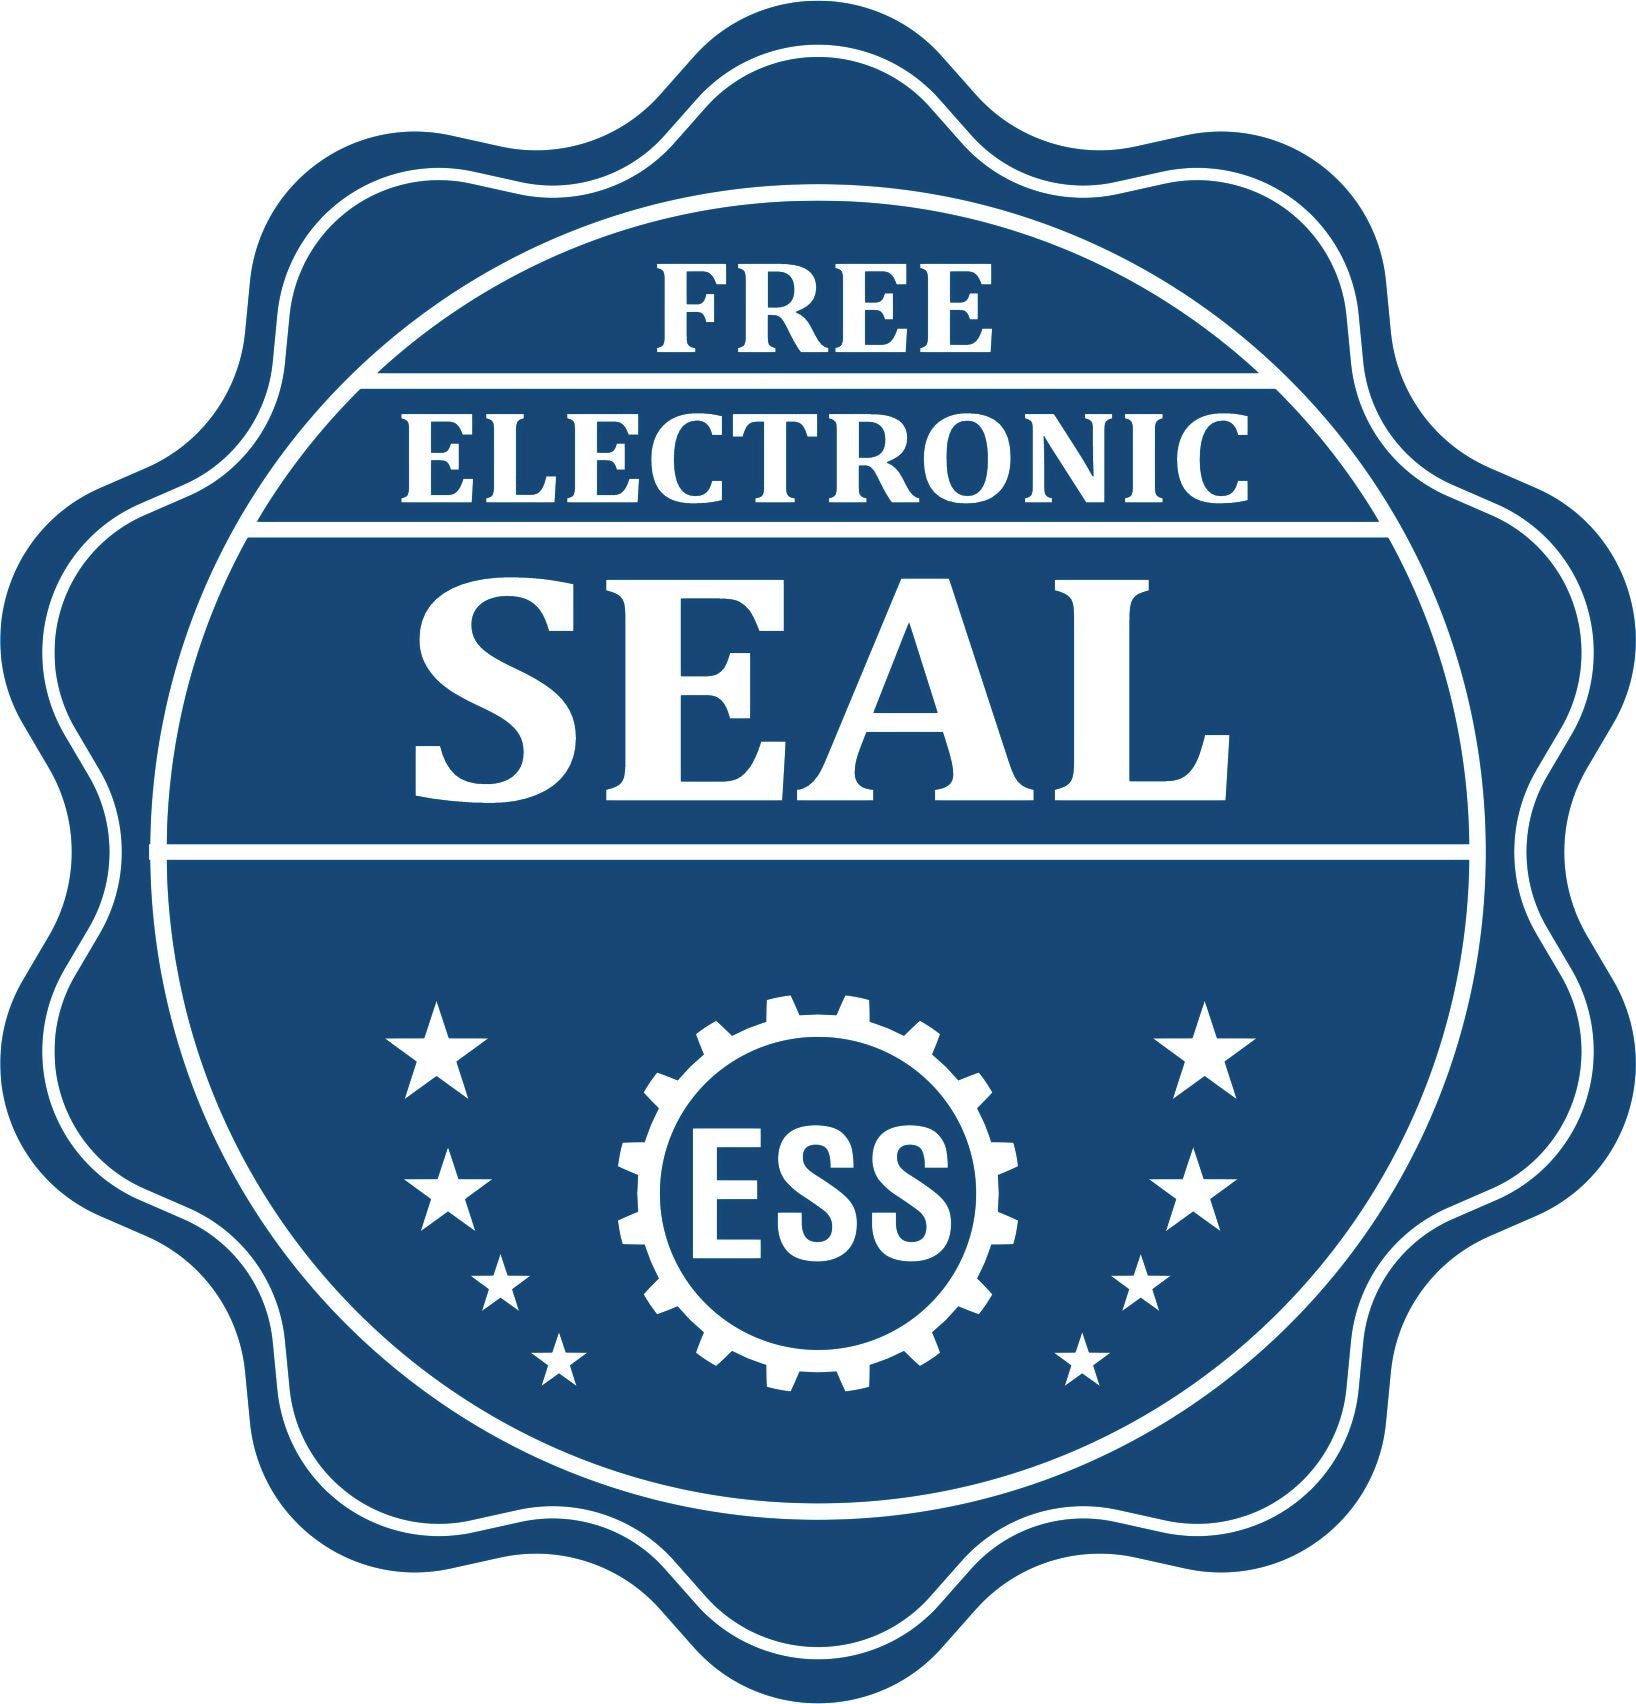 A badge showing a free electronic seal for the MaxLight Premium Pre-Inked Delaware State Seal Notarial Stamp with stars and the ESS gear on the emblem.